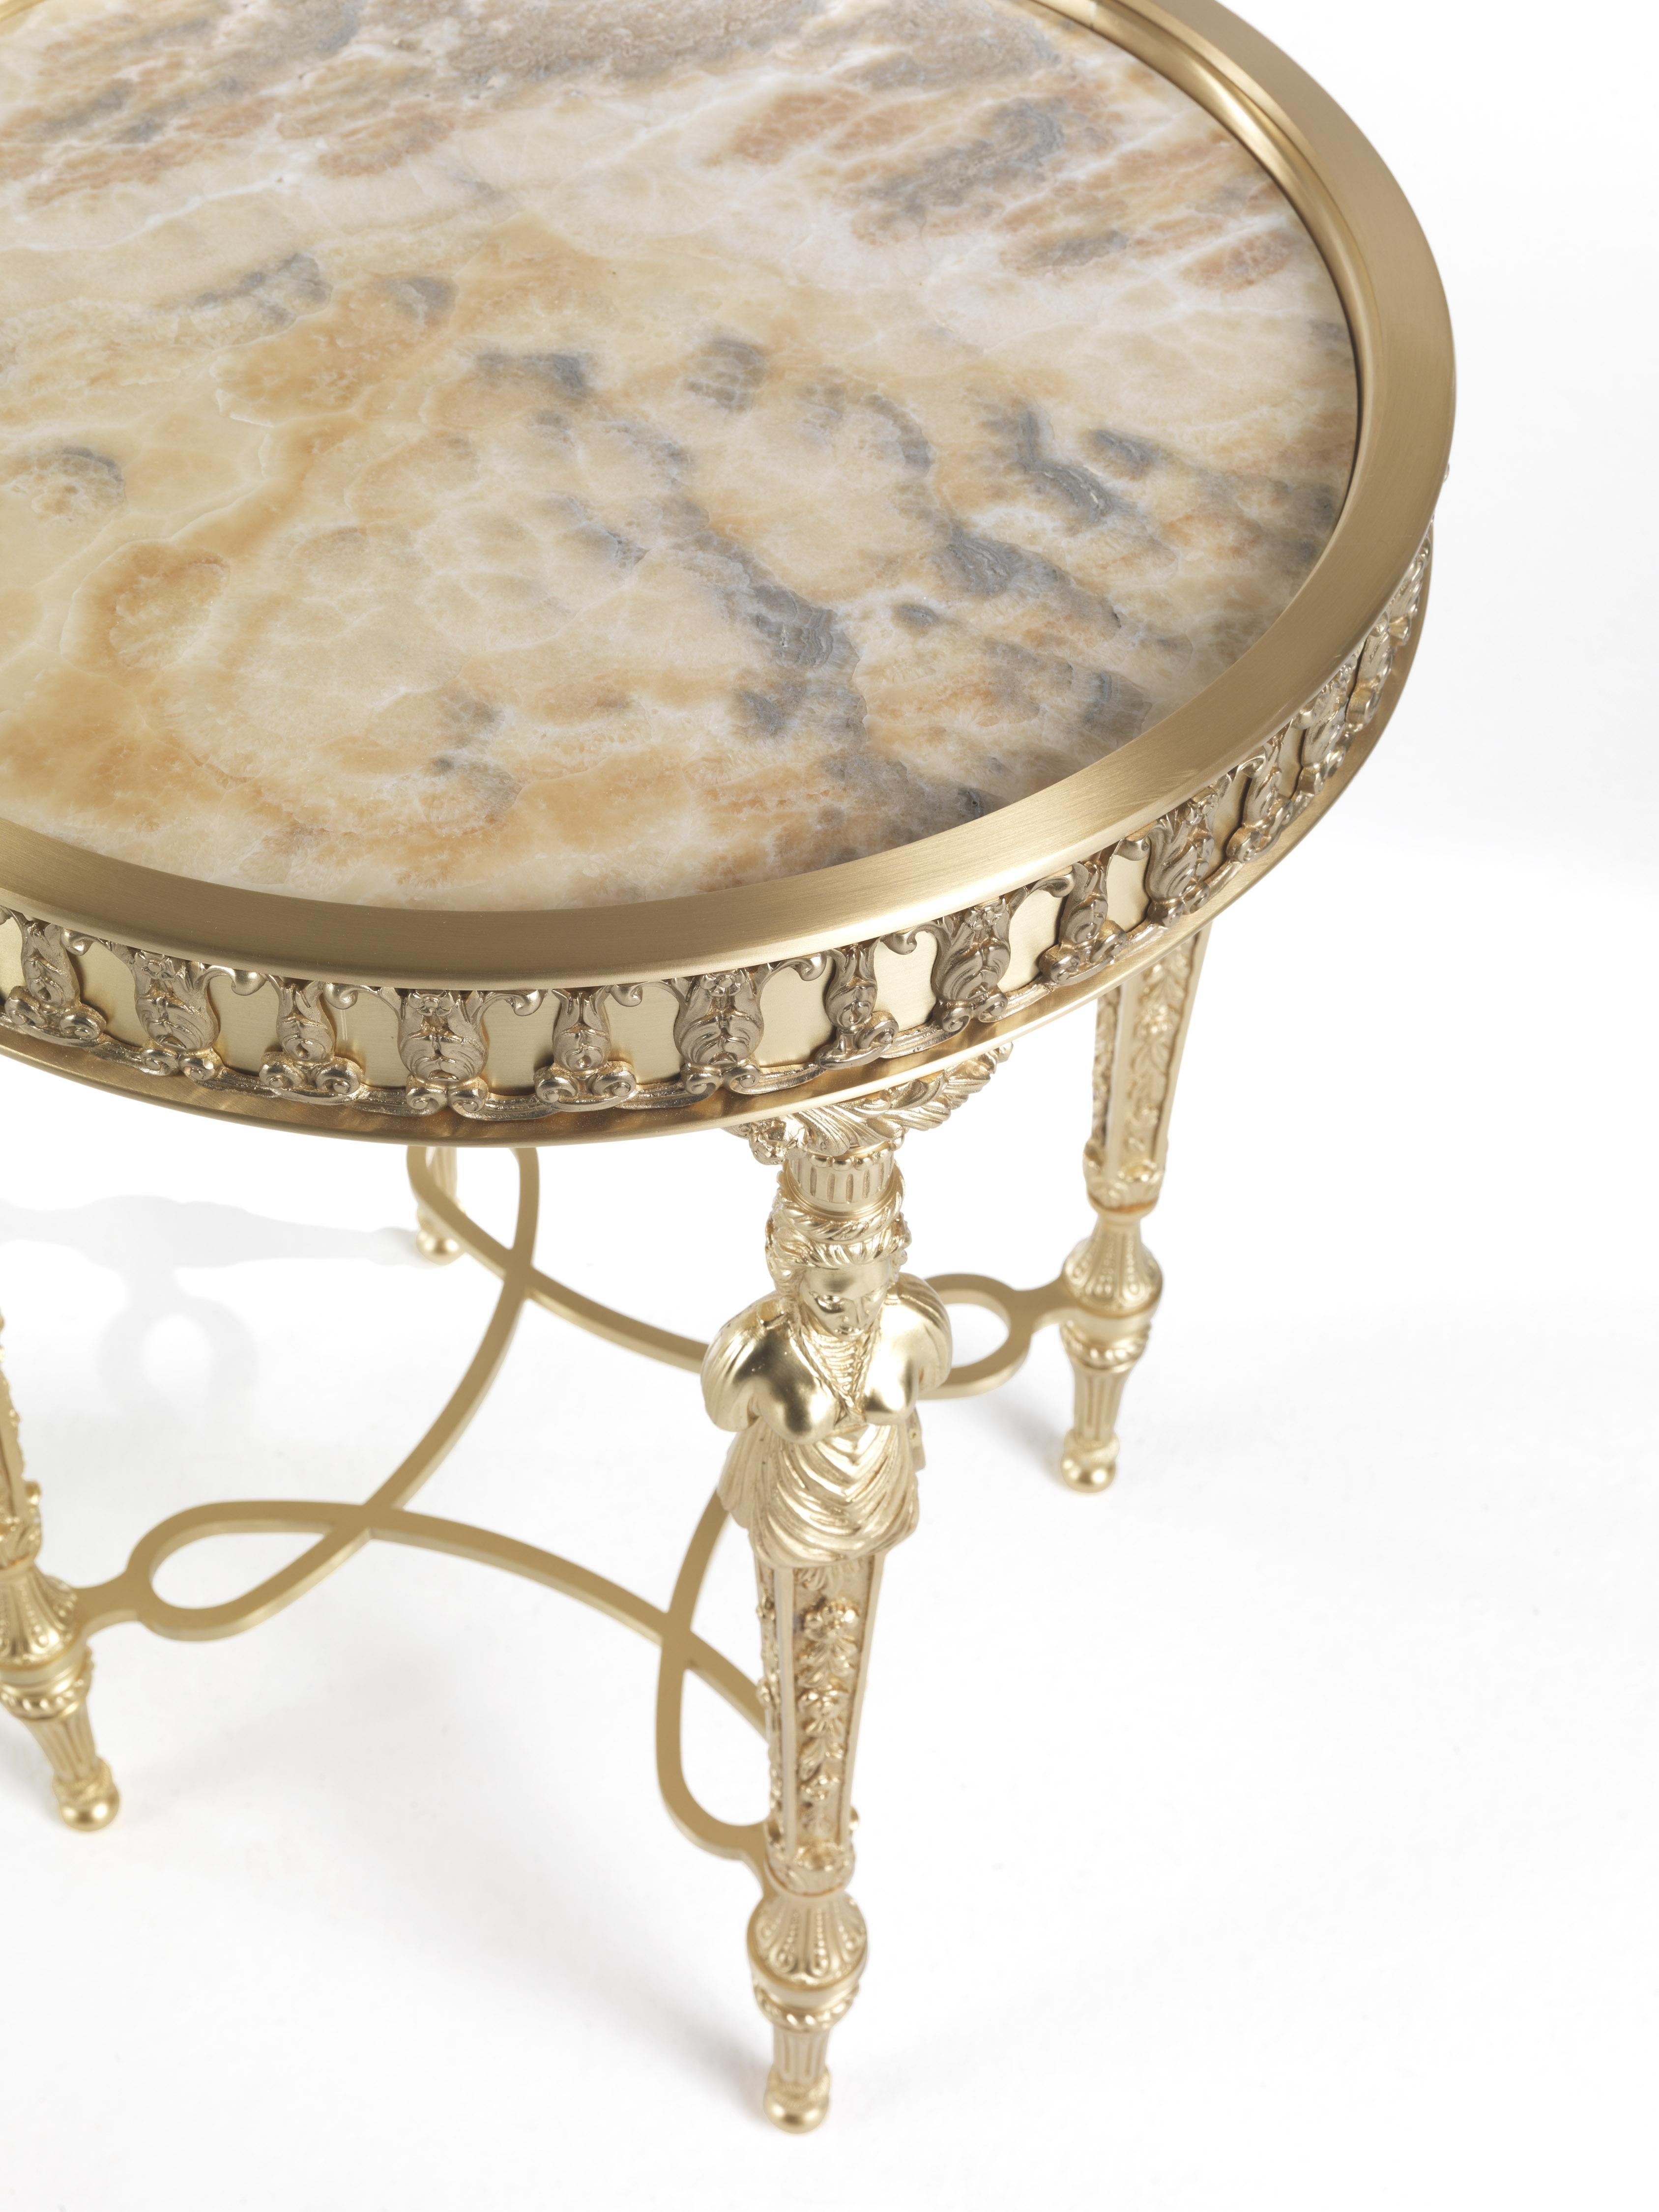 Italian 21st Century Lumiere Side Table in Lost-wax Cast Brass with Cloudy Onyx Top For Sale